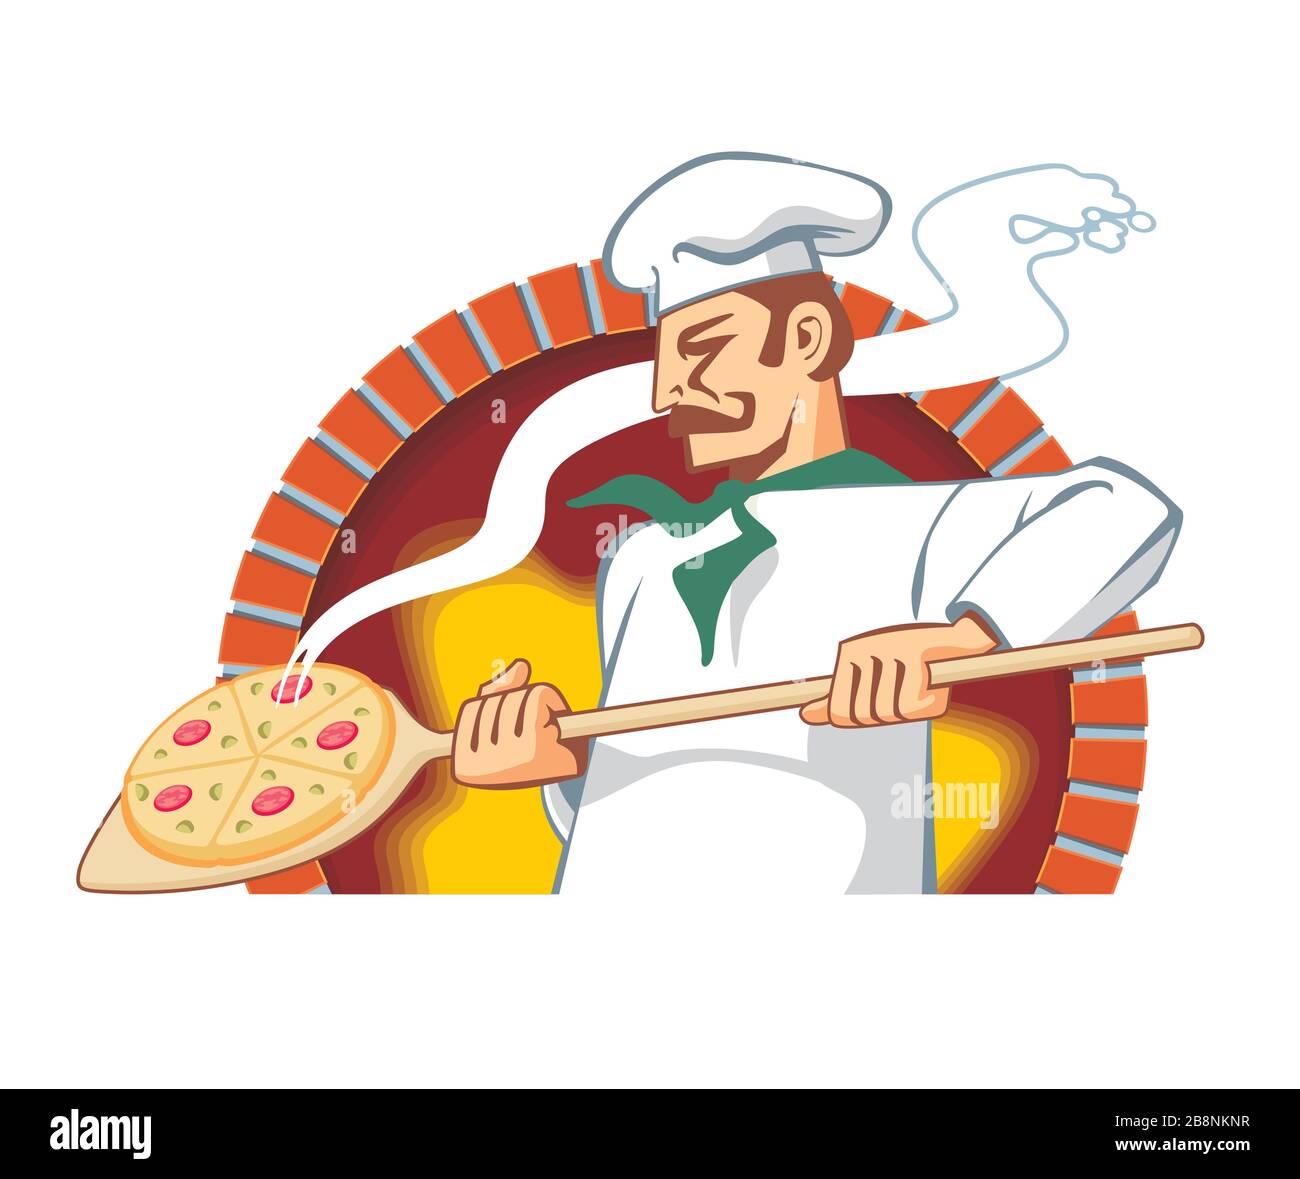 Pizzaiolo at work, pulls out the finished pizza from the stone oven with fire, stylizes vector icon illustration Stock Vector